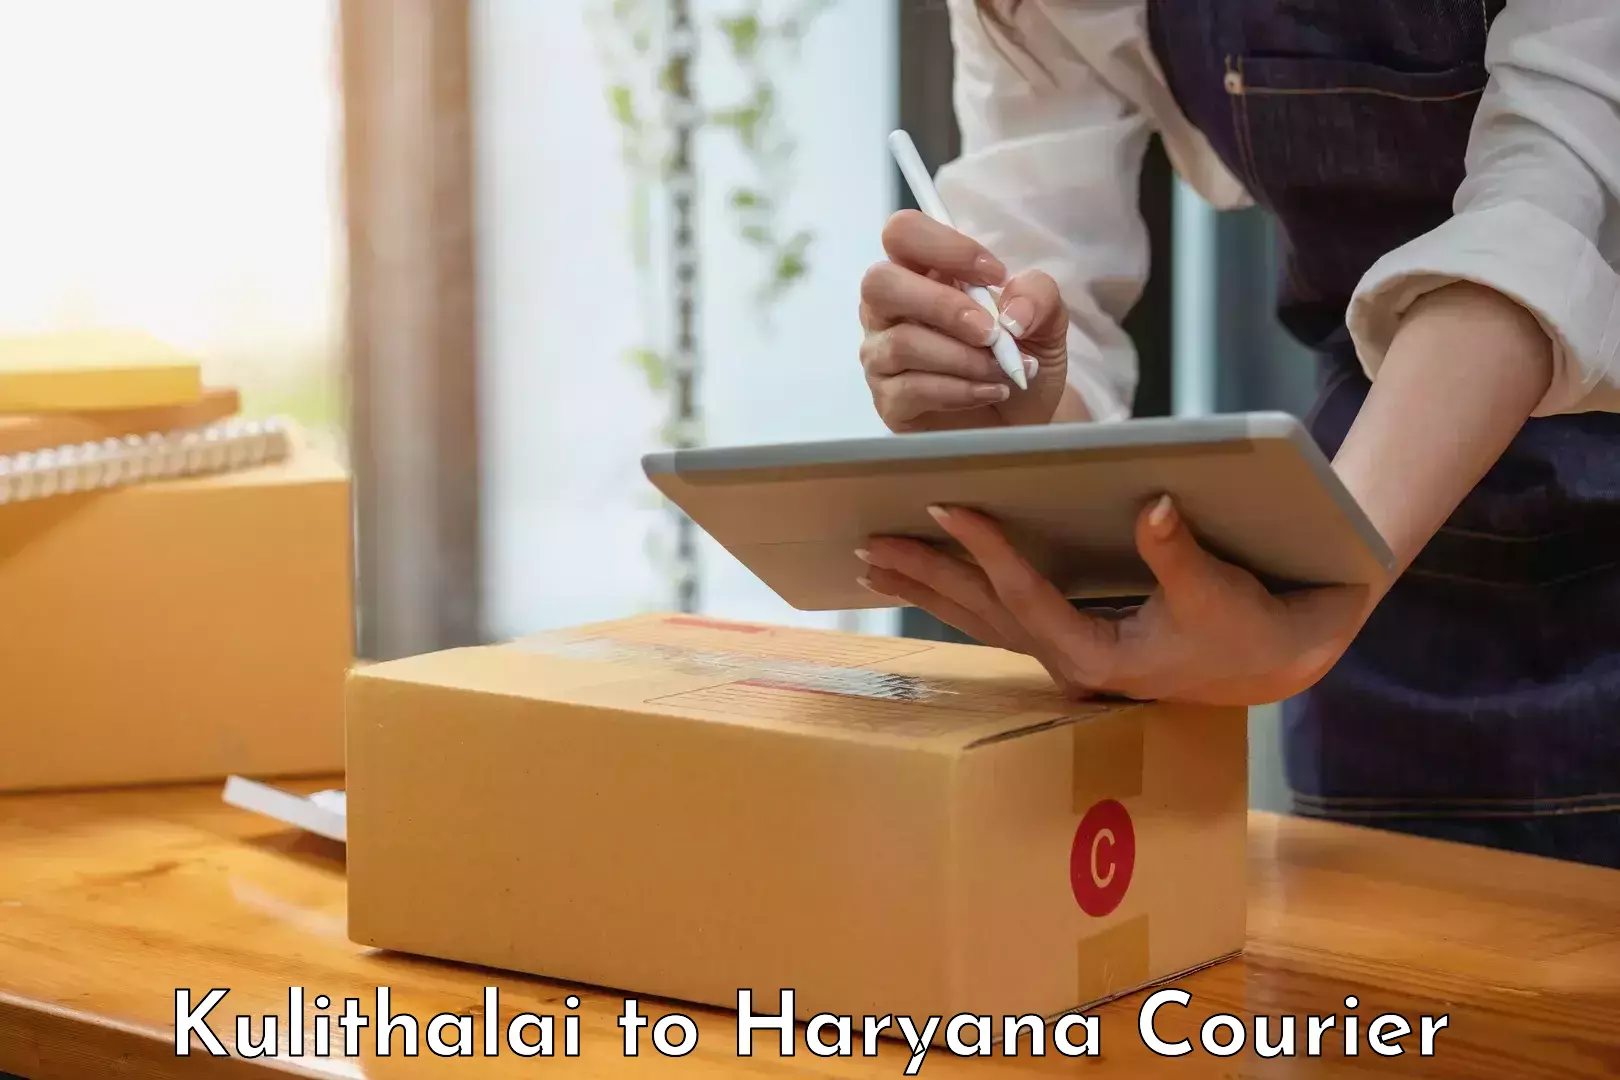 Heavy parcel delivery Kulithalai to NCR Haryana